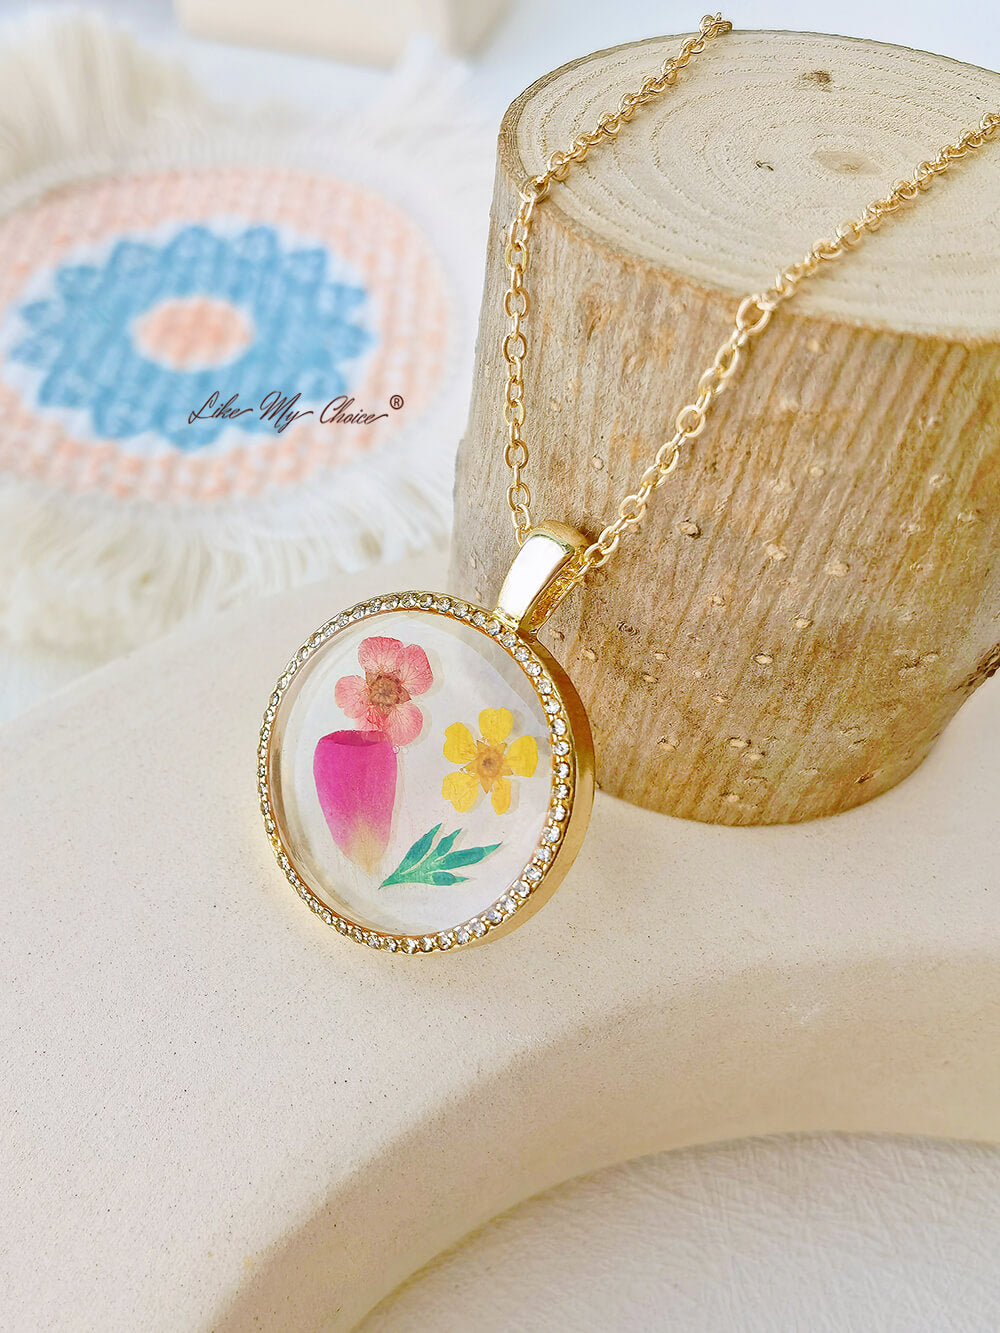 Gemini Forget Me Not Flower Resin Round Crystal Pendant Necklace